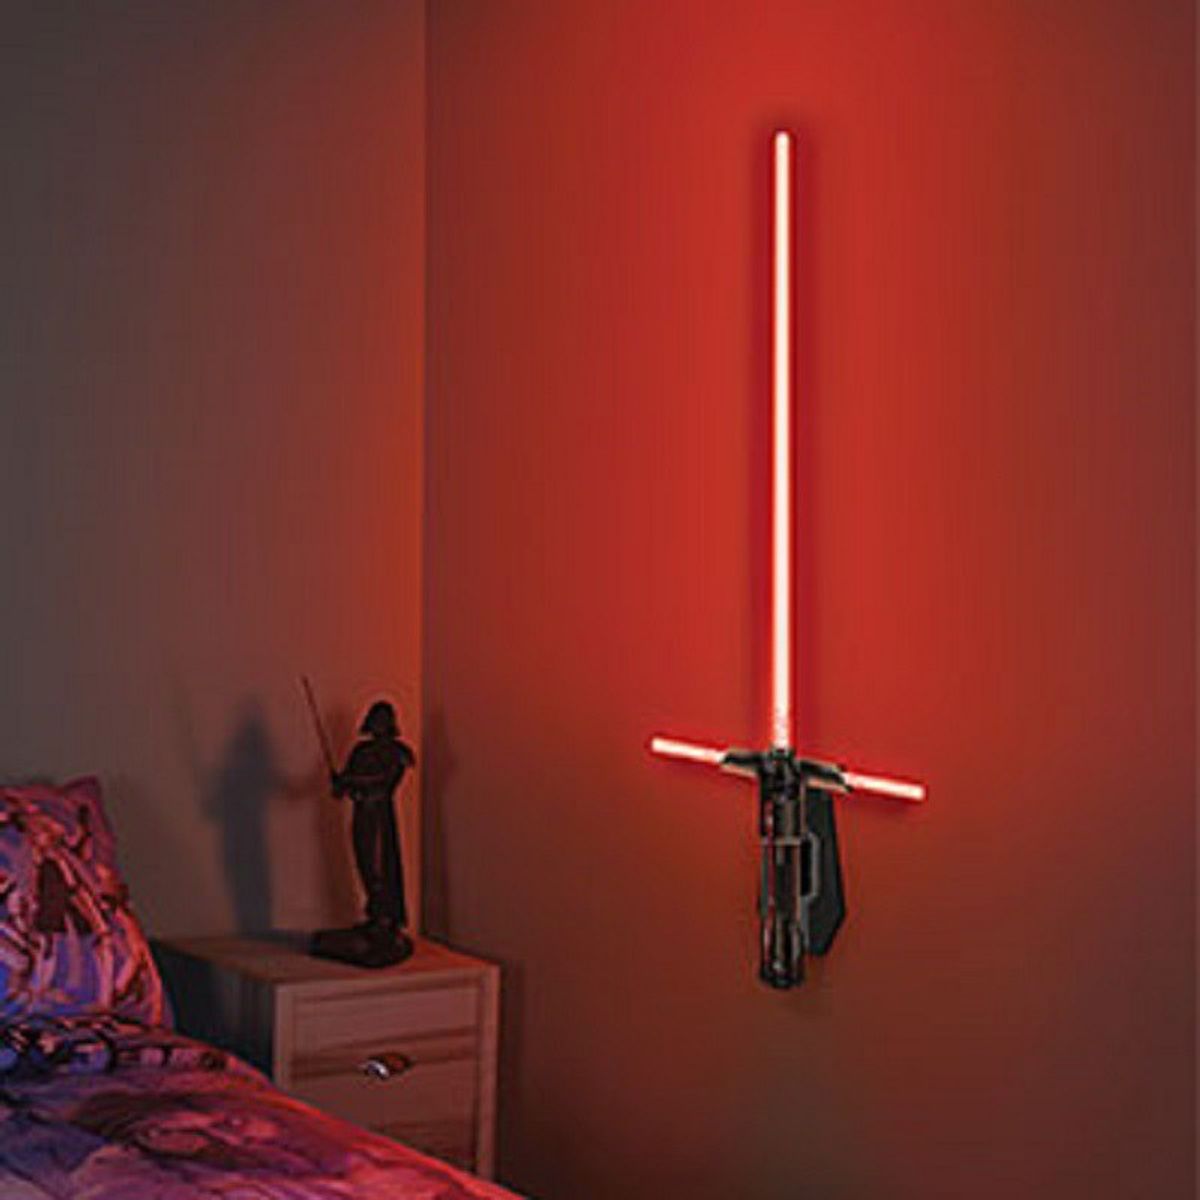 16 Things Every Star Wars Fan Needs For Their Apartment